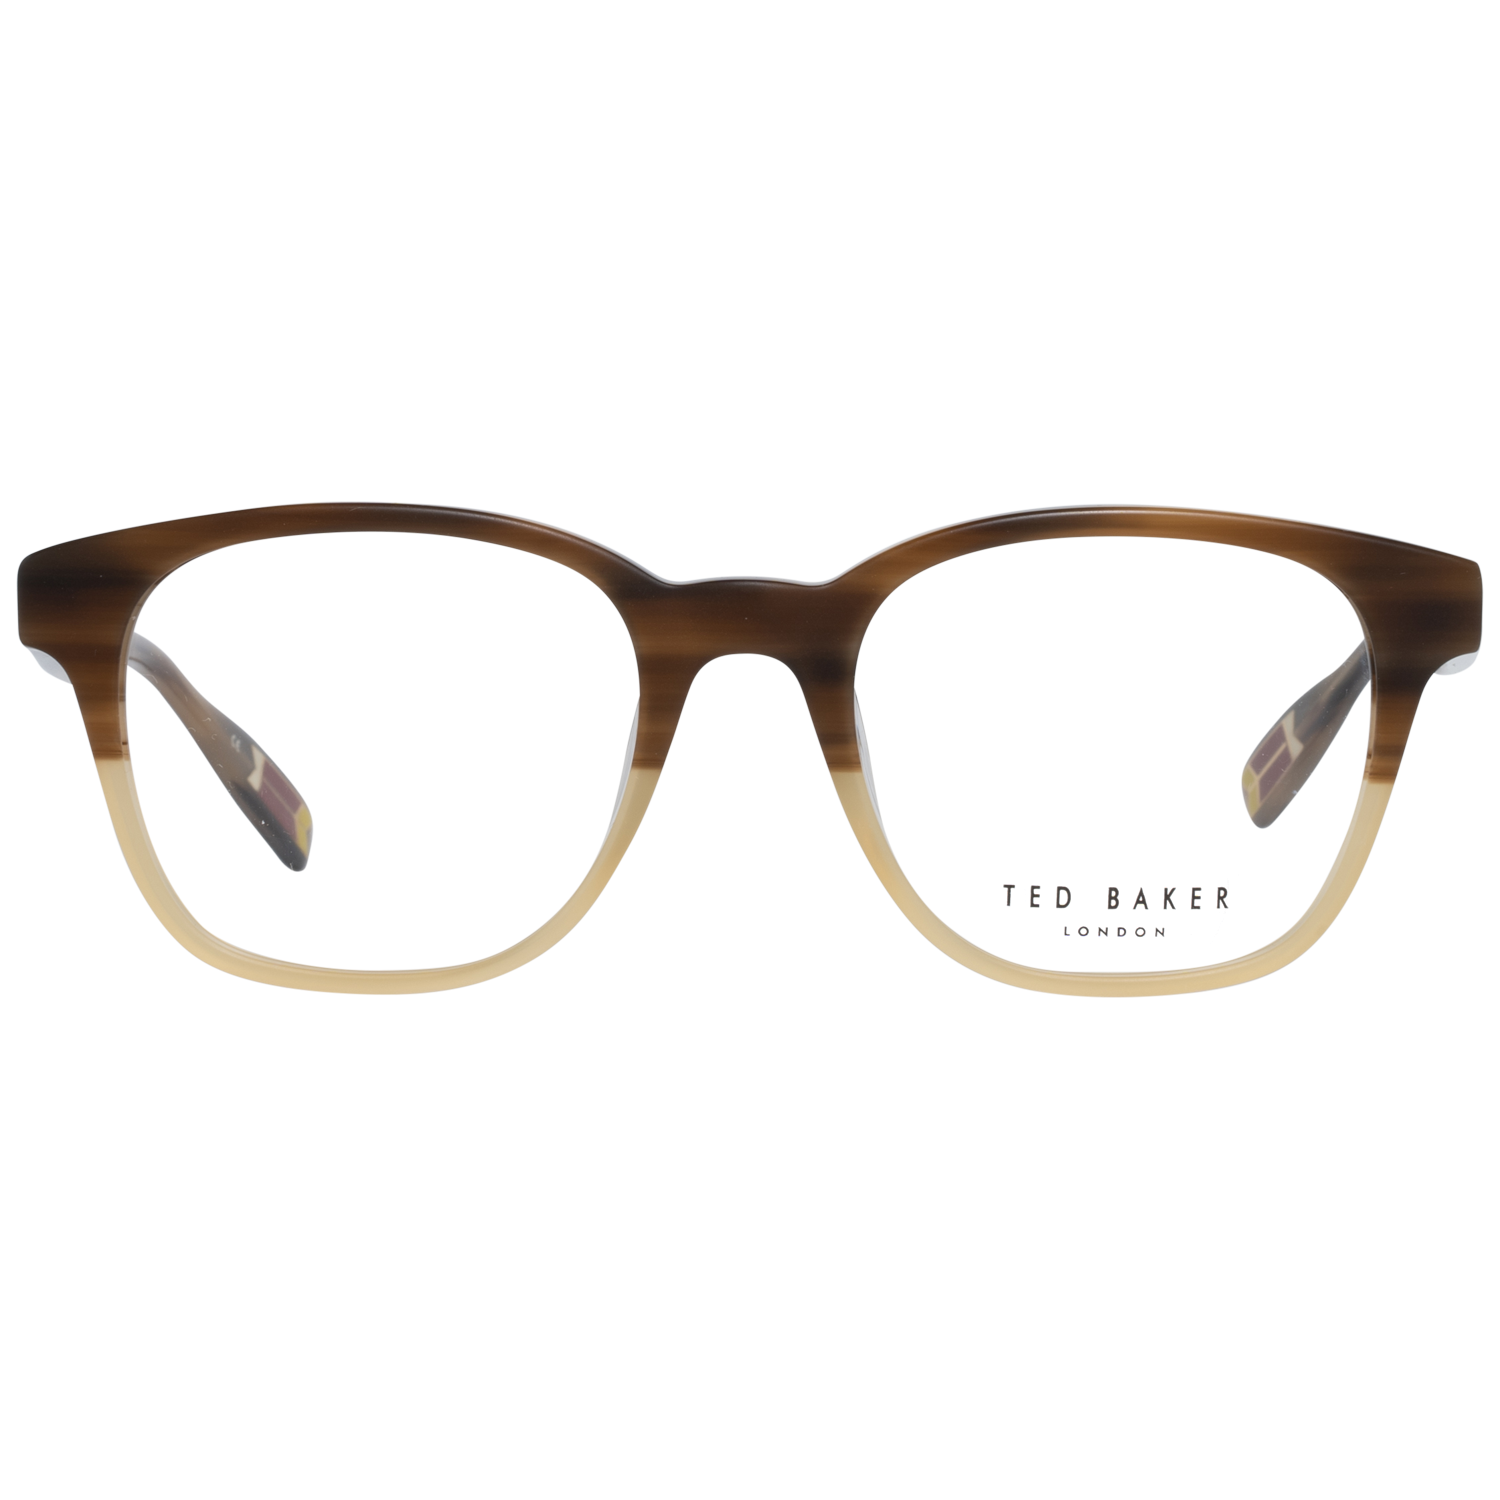 GenderMenMain colorBrownFrame colorBrownFrame materialPlasticSize51-19-145Lenses width51mmLenses heigth42mmBridge length19mmFrame width140mmTemple length145mmShipment includesCase, Cleaning clothStyleFull-RimSpring hingeYes